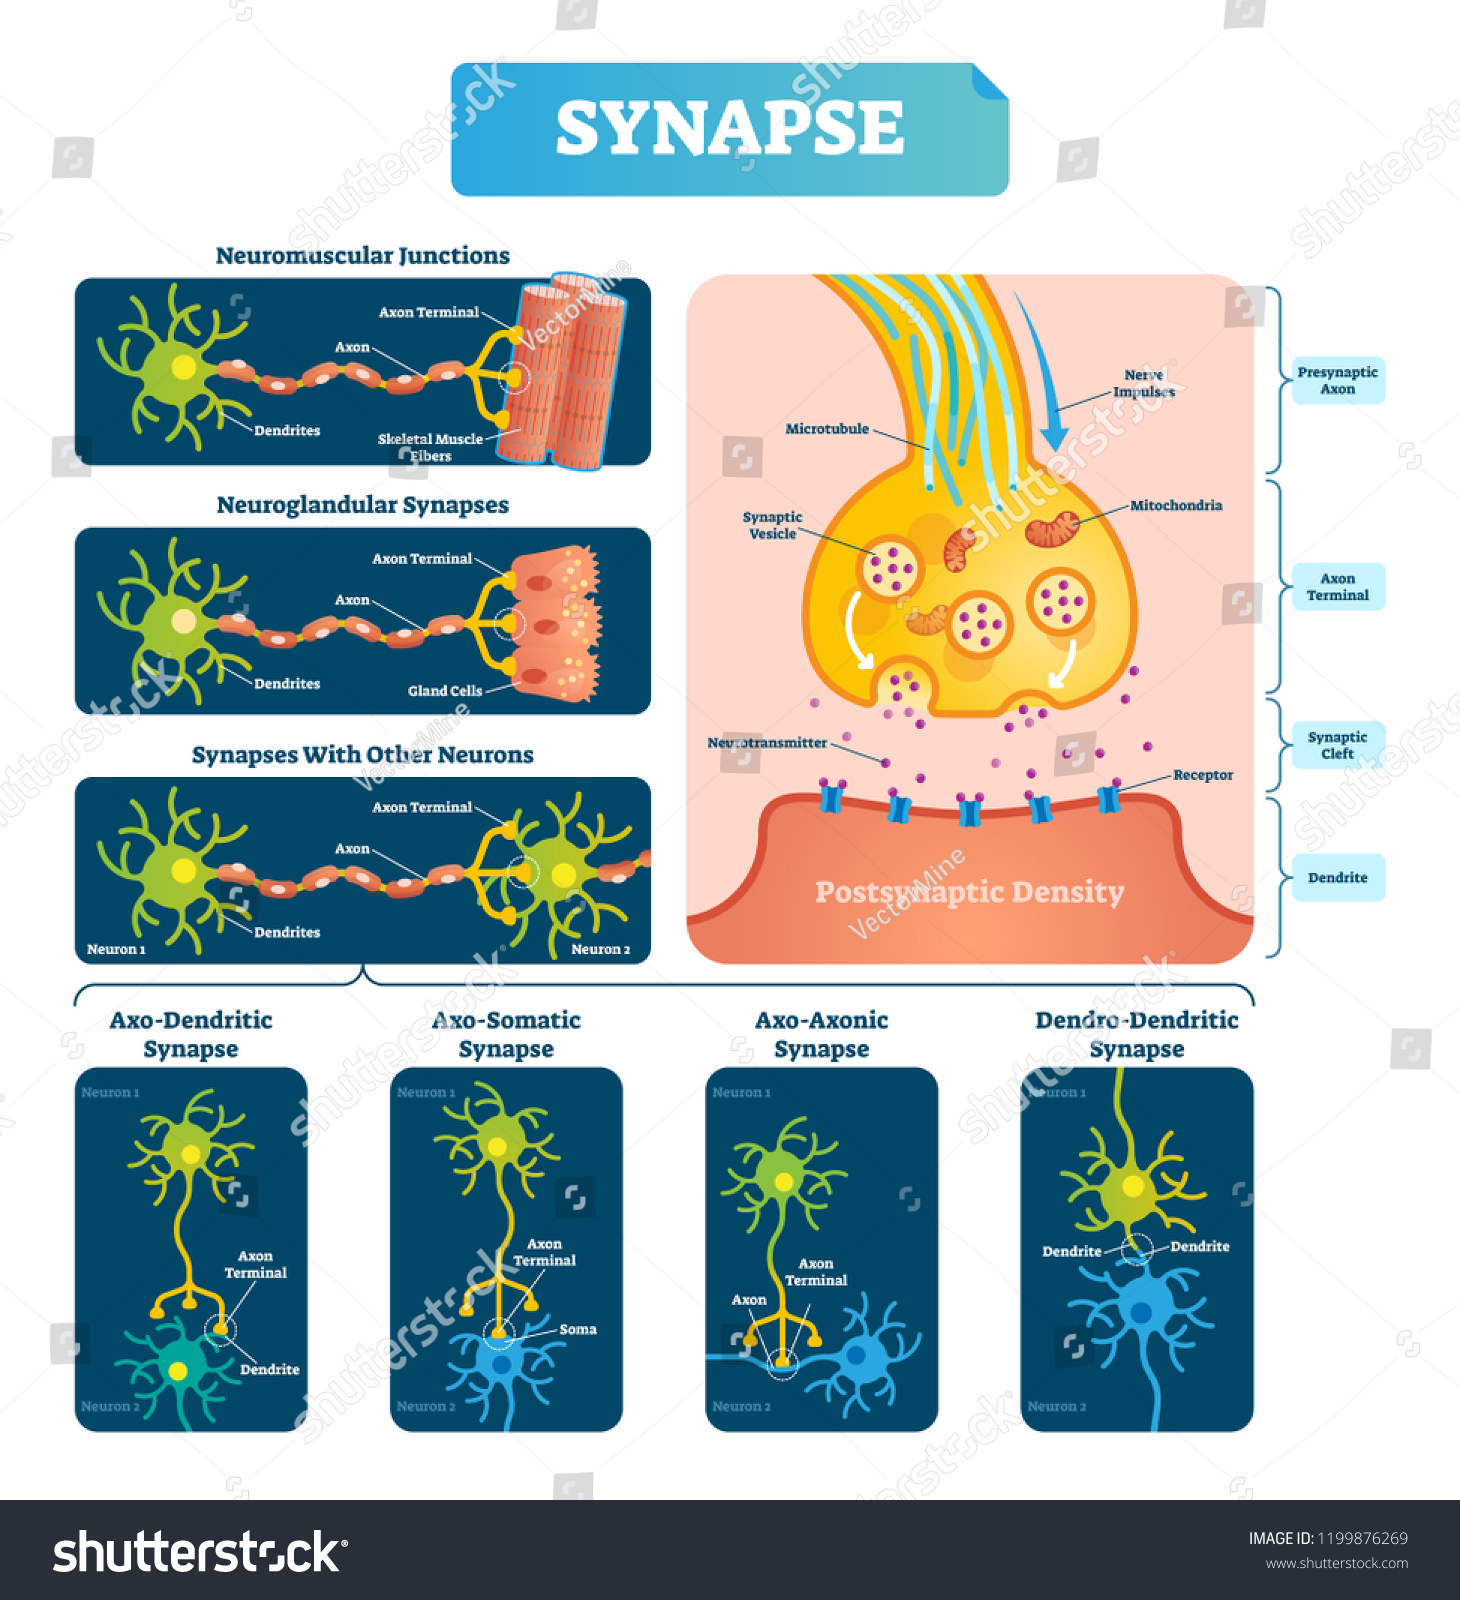 SVG of Synapse vector illustration. Labeled diagram with neuromuscular junction, glandular and other neirons example. Closeup with isolated axon, cleft and dendrite structure. svg